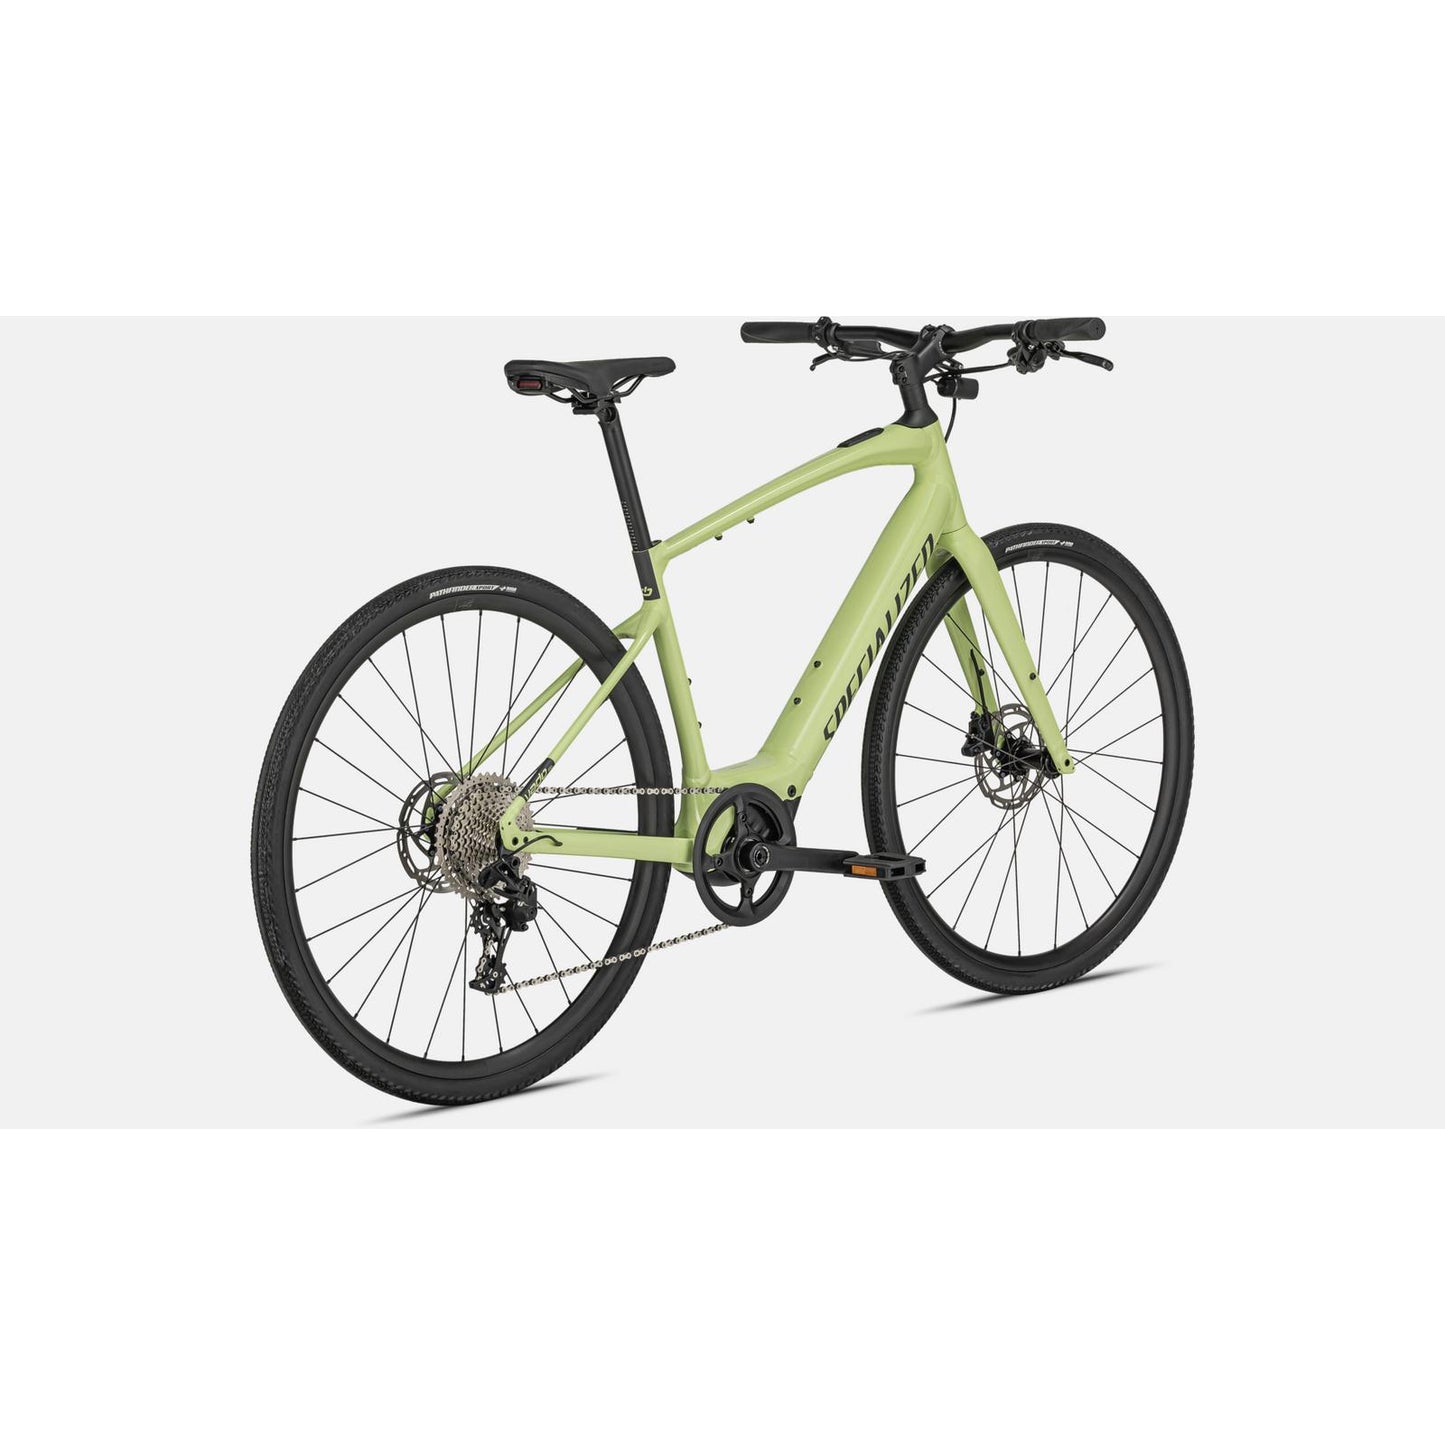 Specialized Turbo Vado SL 4.0 Active Electric Bike - Bikes - Bicycle Warehouse